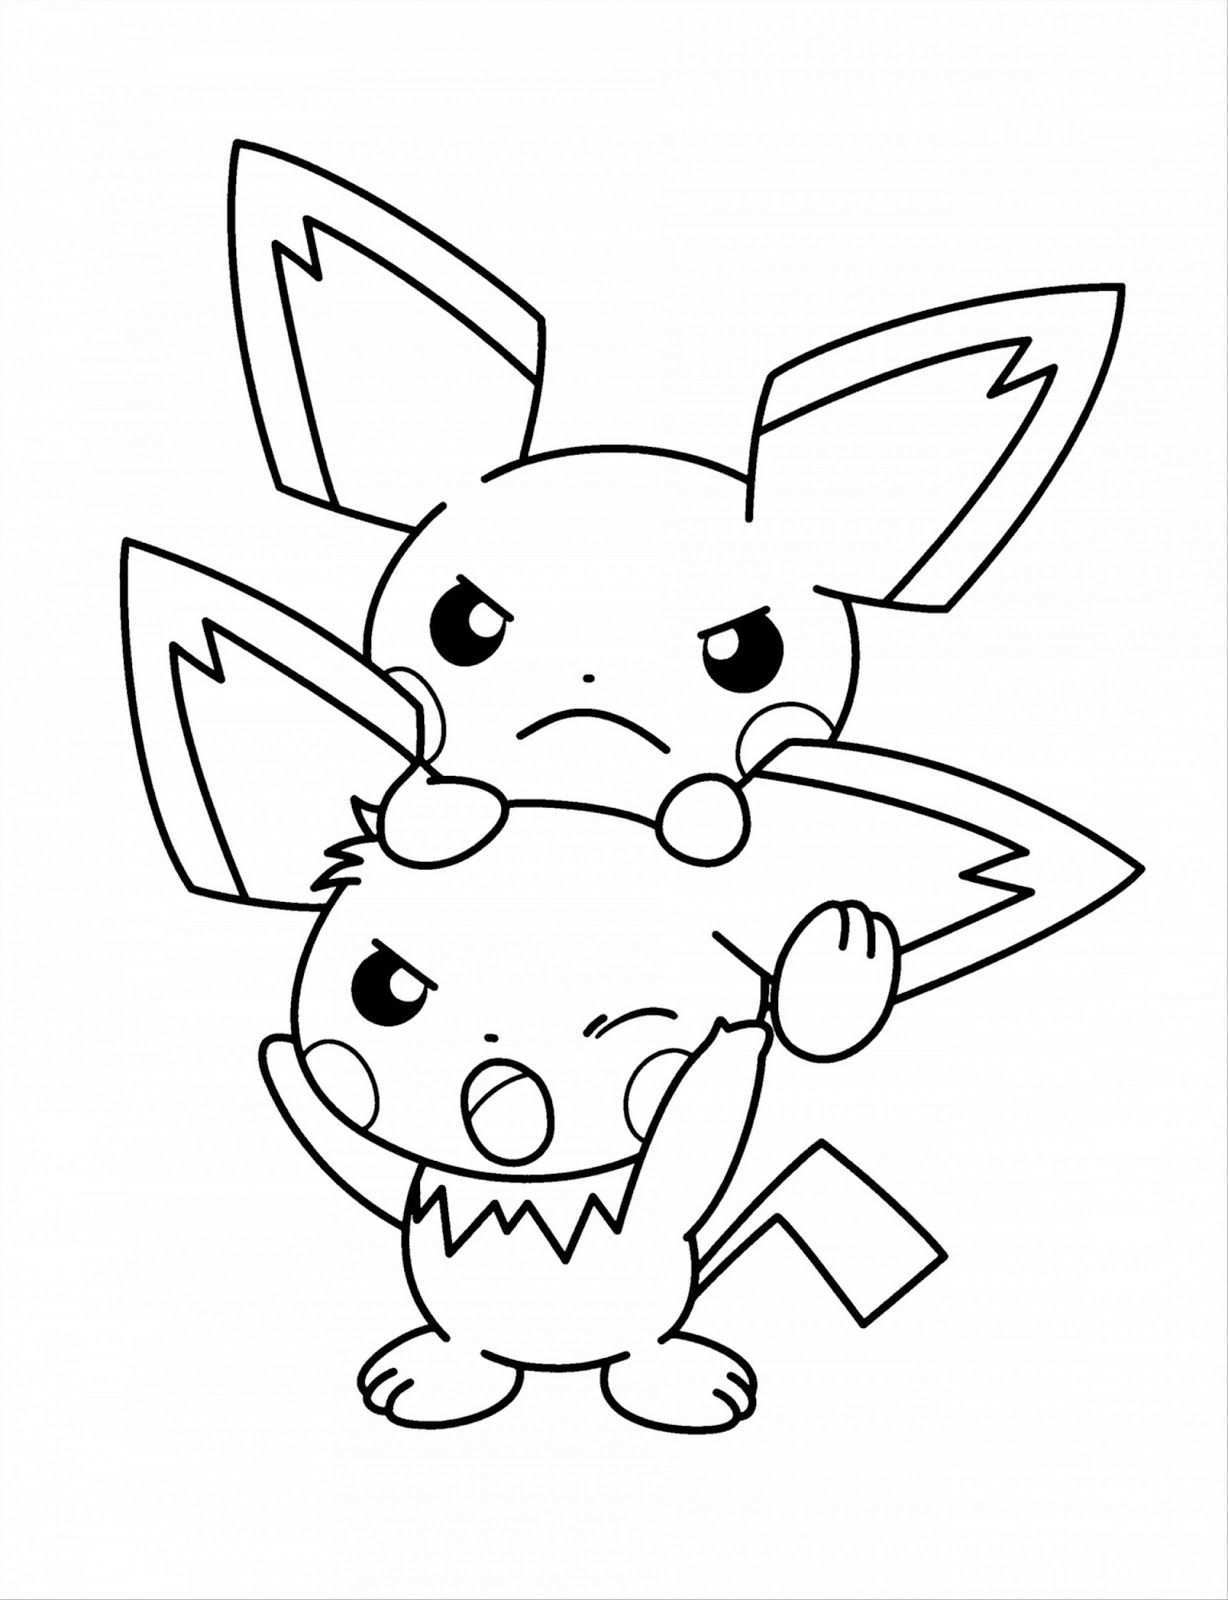 Super Cute Baby Pokemon Coloring Pages Pichu Pikachu Coloring Page Pokemon Coloring P